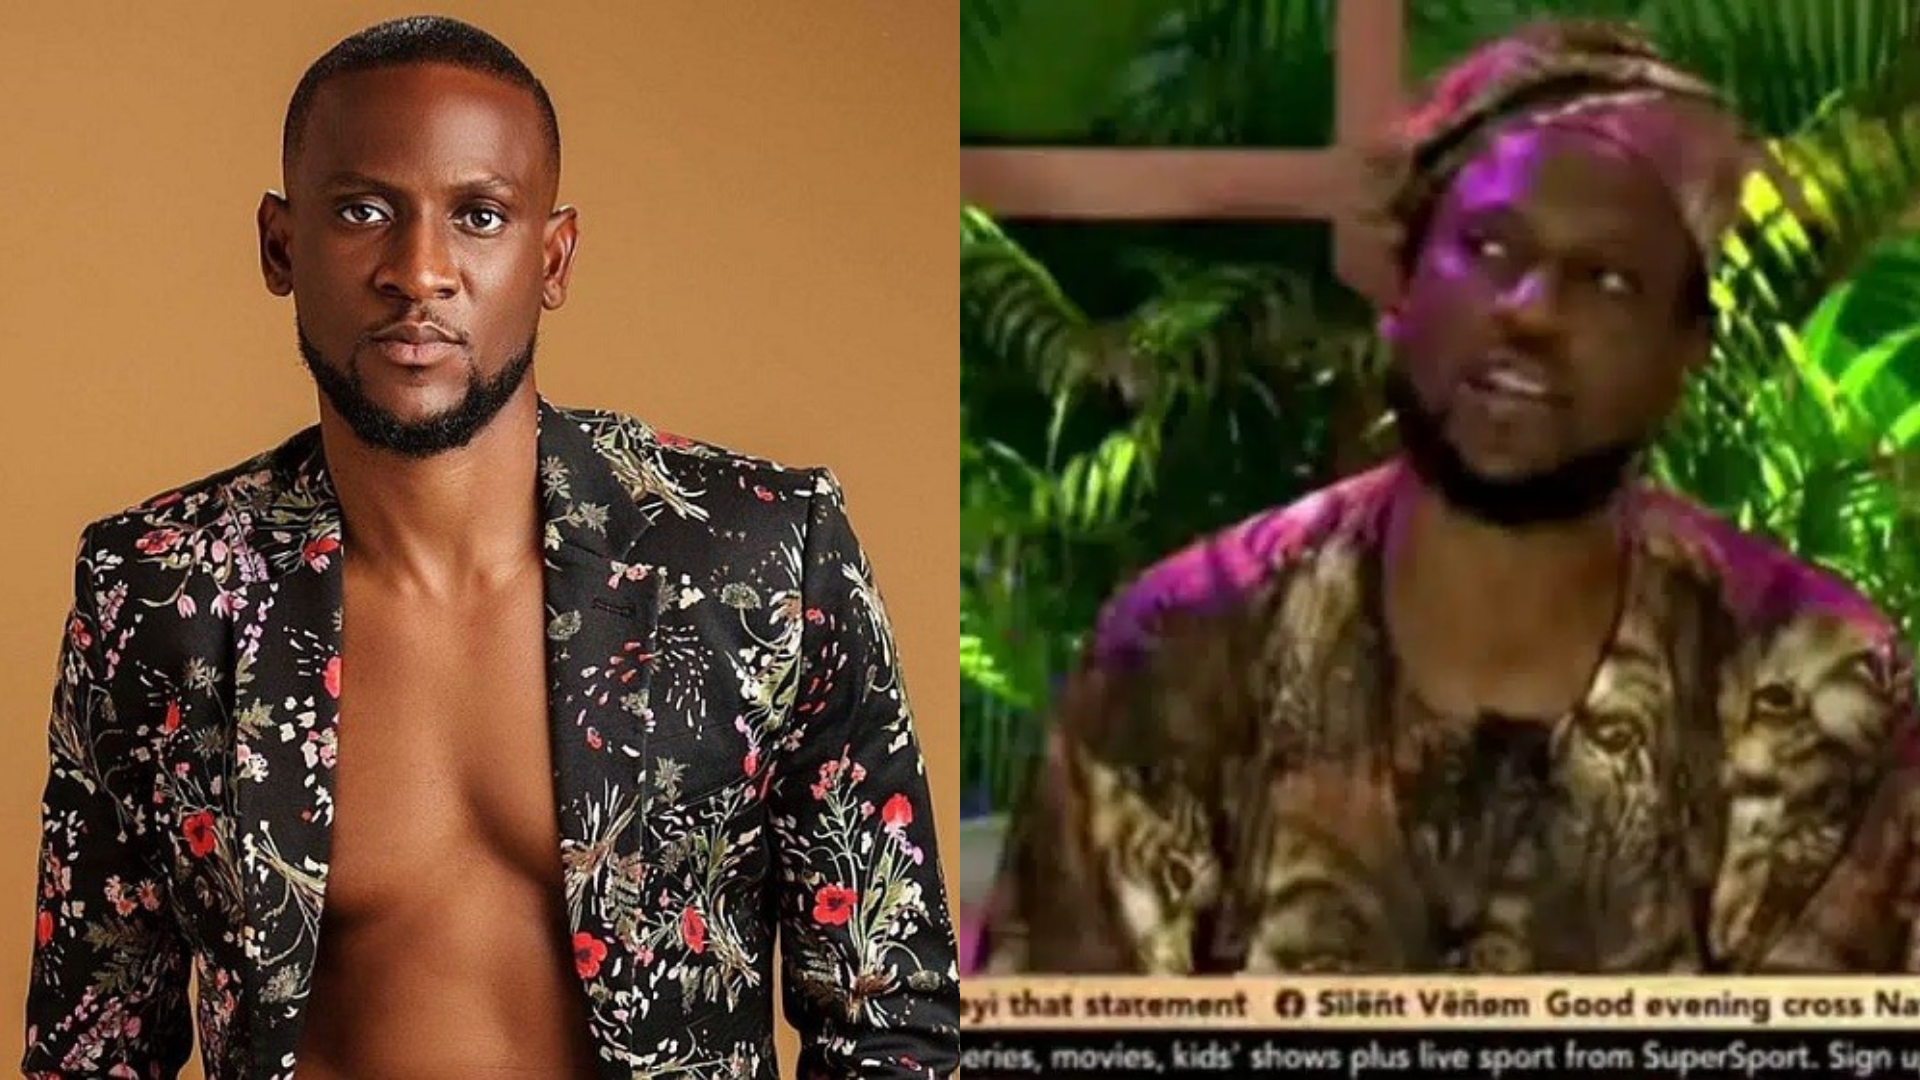 “You don disappoint me” – Omashola to Biggie [Video]